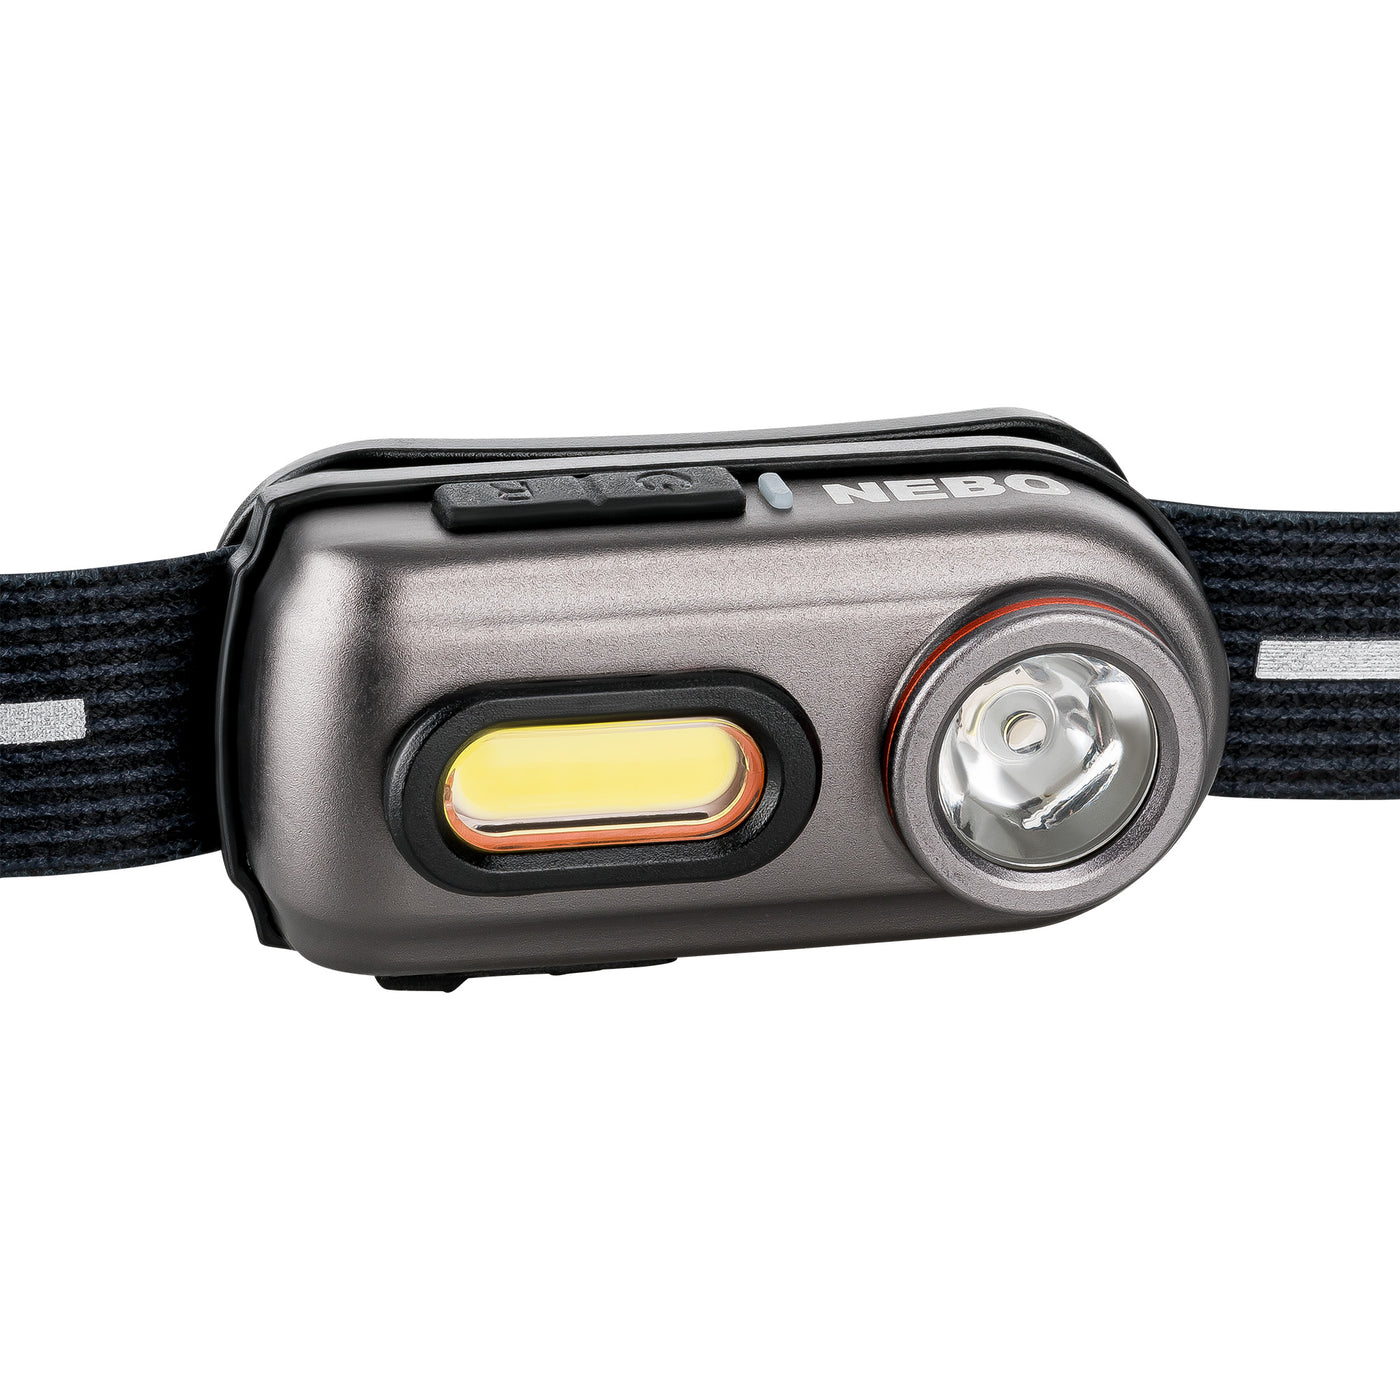 The Einstein™ 400 RC Headlamp by NEBO is a low-profile, compact 400 lumen rechargeable headlamp with 5 light modes